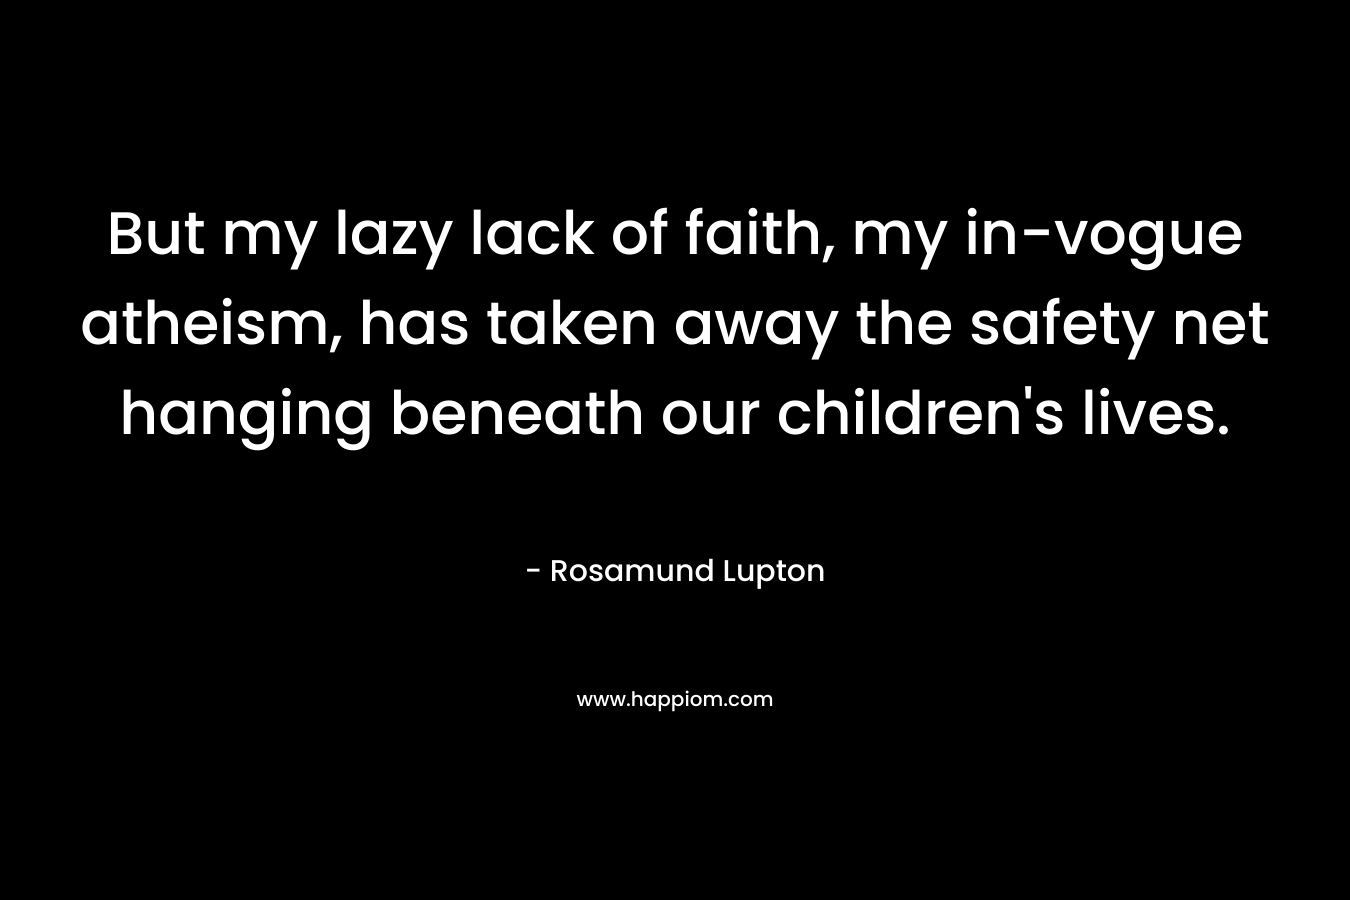 But my lazy lack of faith, my in-vogue atheism, has taken away the safety net hanging beneath our children's lives.